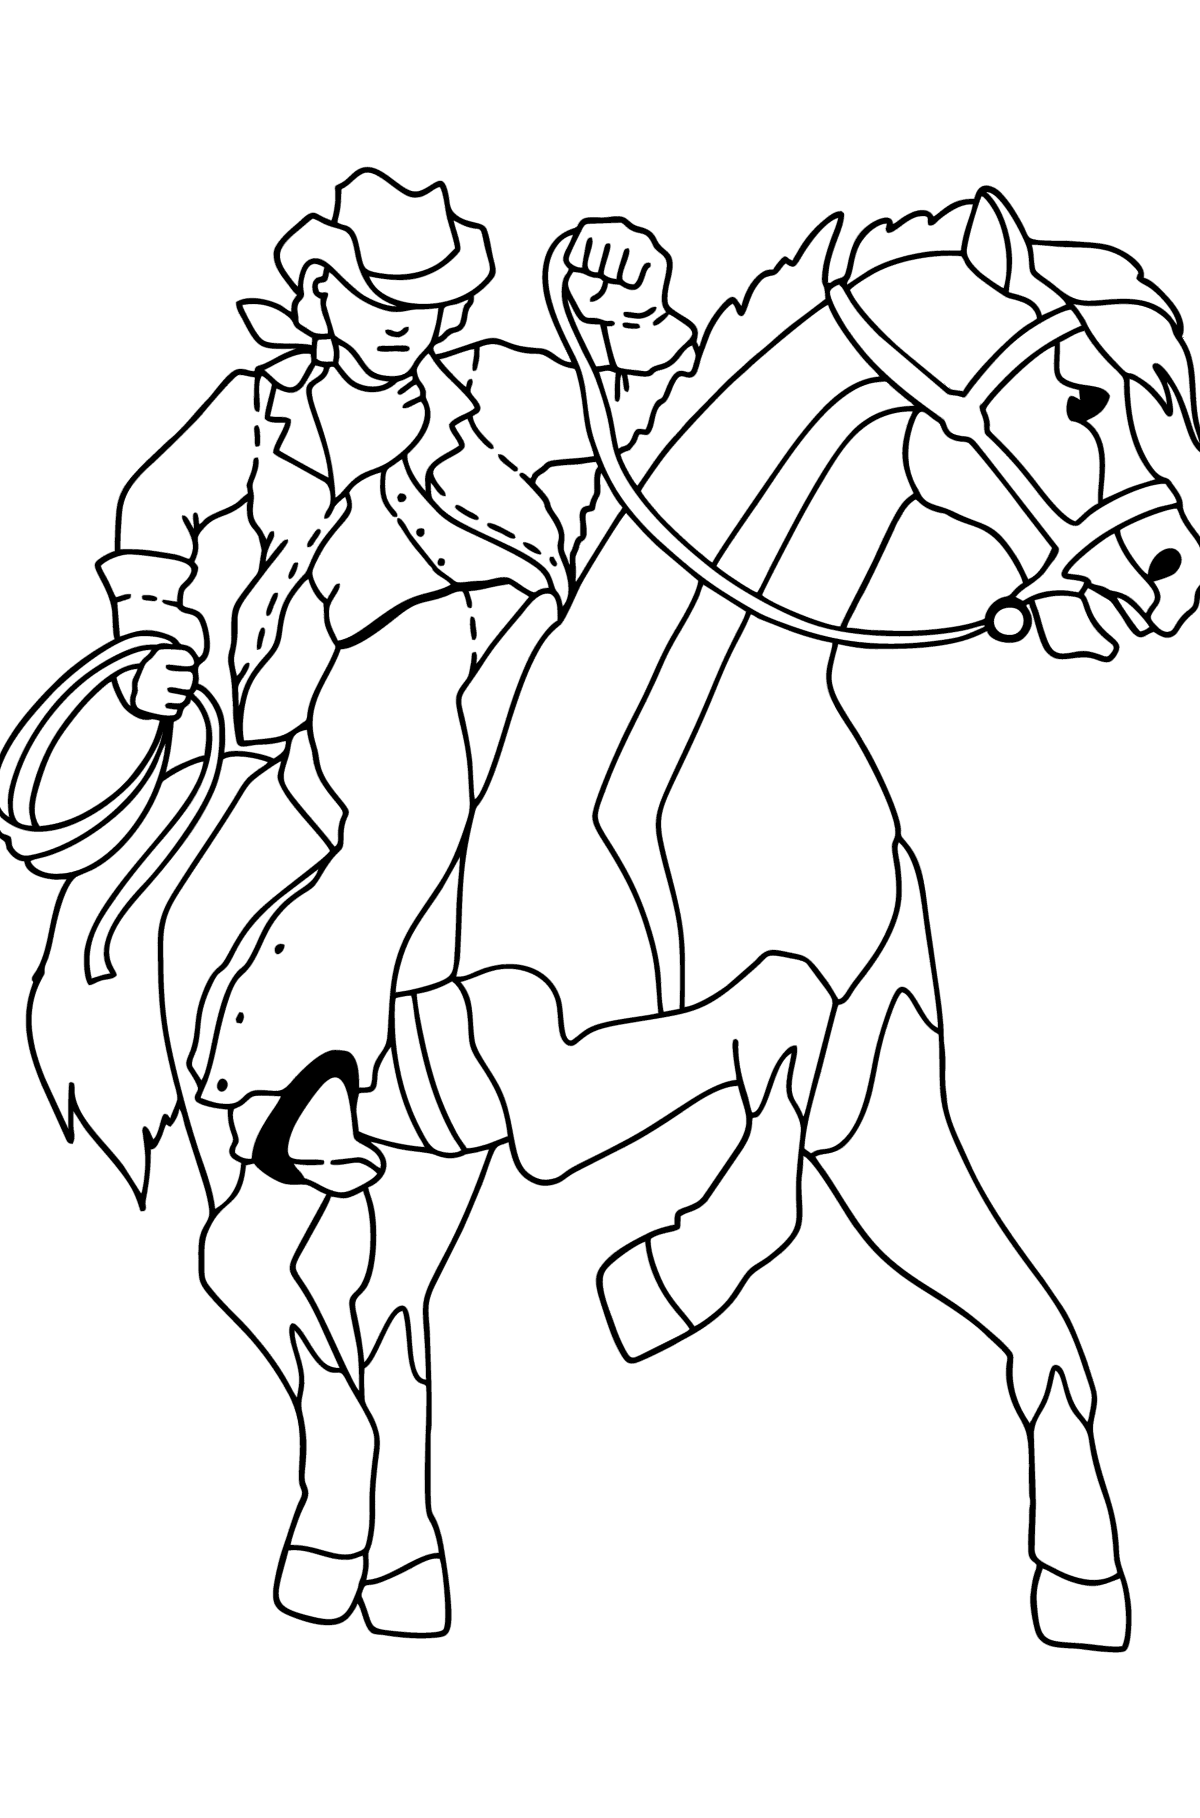 Brave cowboy сoloring page - Coloring Pages for Kids